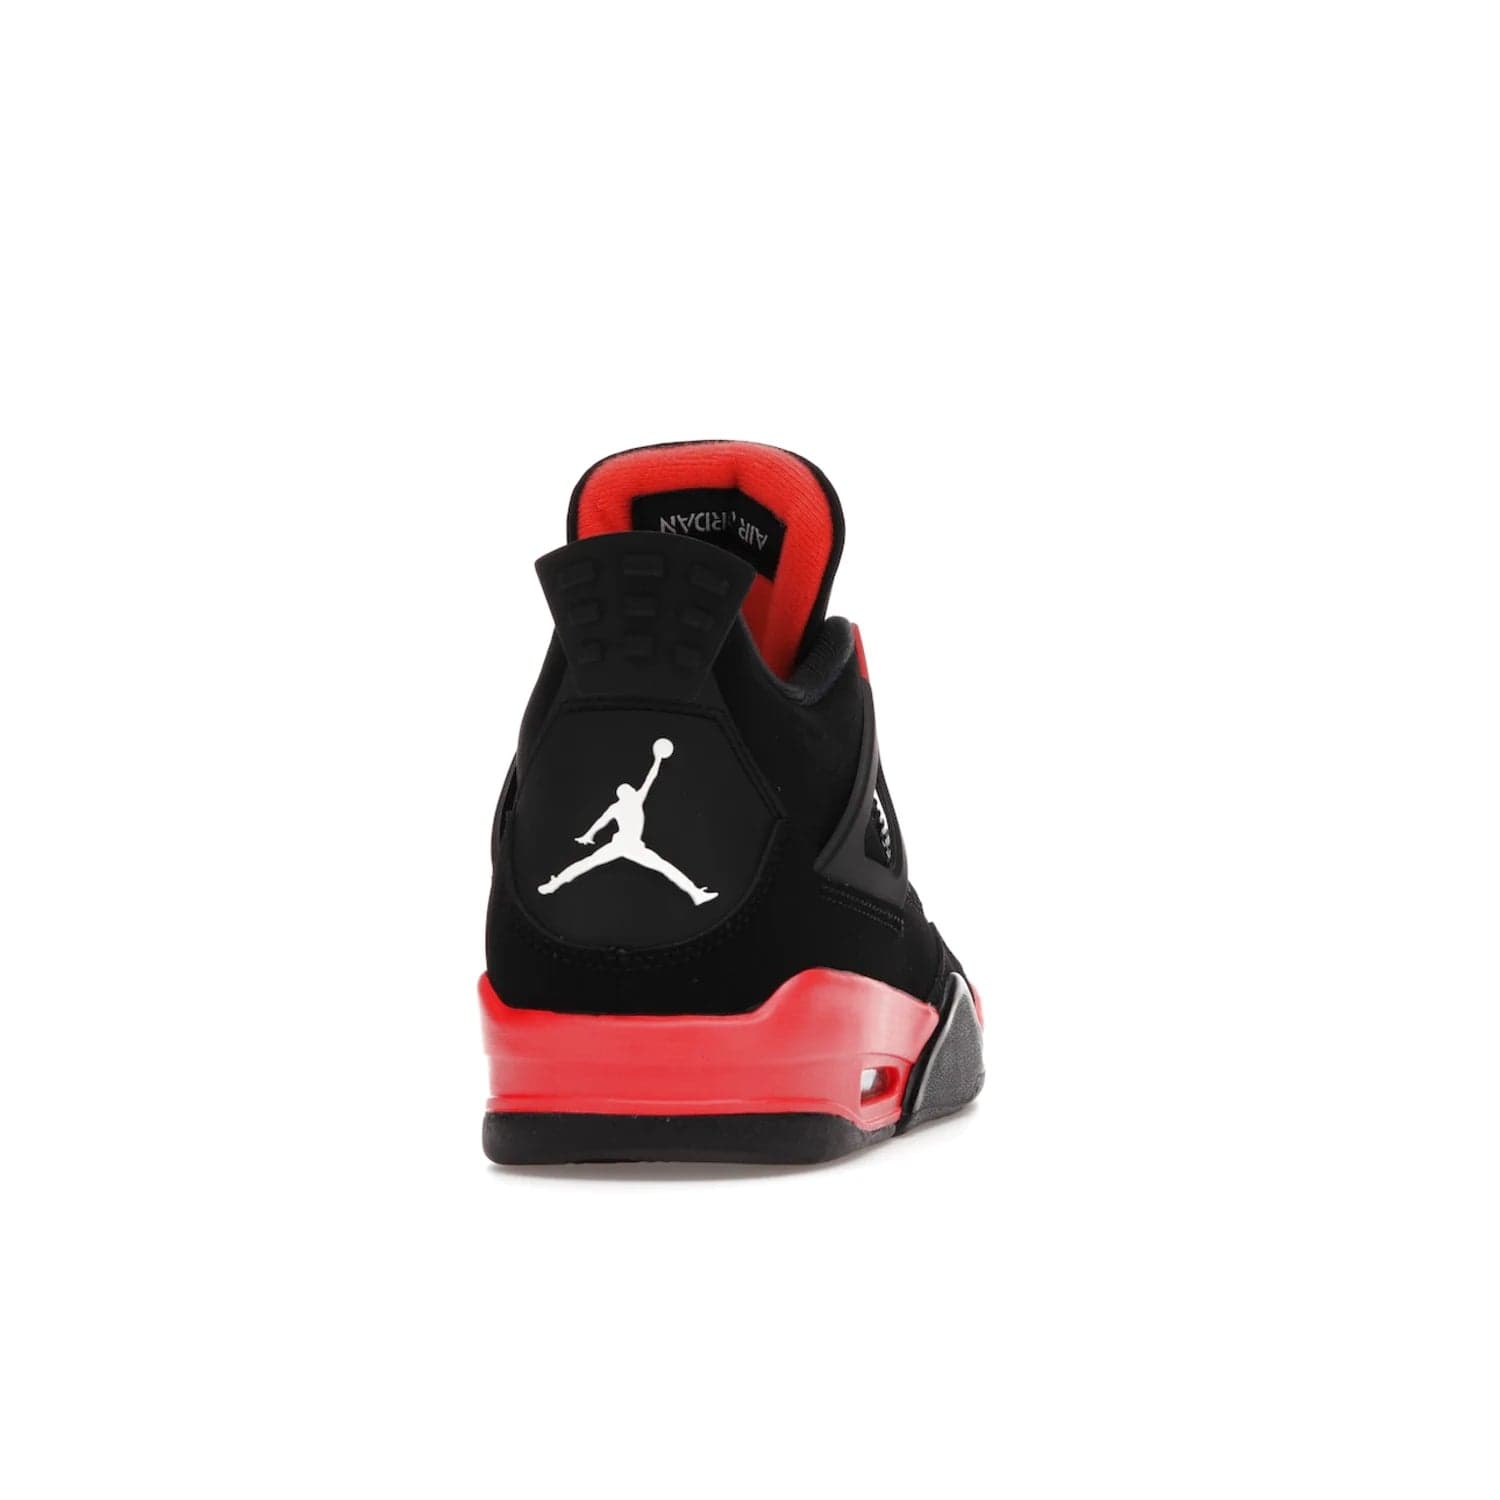 Jordan 4 Retro Red Thunder - Image 29 - Only at www.BallersClubKickz.com - Upscale your footwear with the Air Jordan 4 Retro Red Thunder. Featuring a Durabuck upper, red underlays, signature Flight patch, and vibrant red midsole, this retro sneaker adds style and edge. Releases in January 2022.